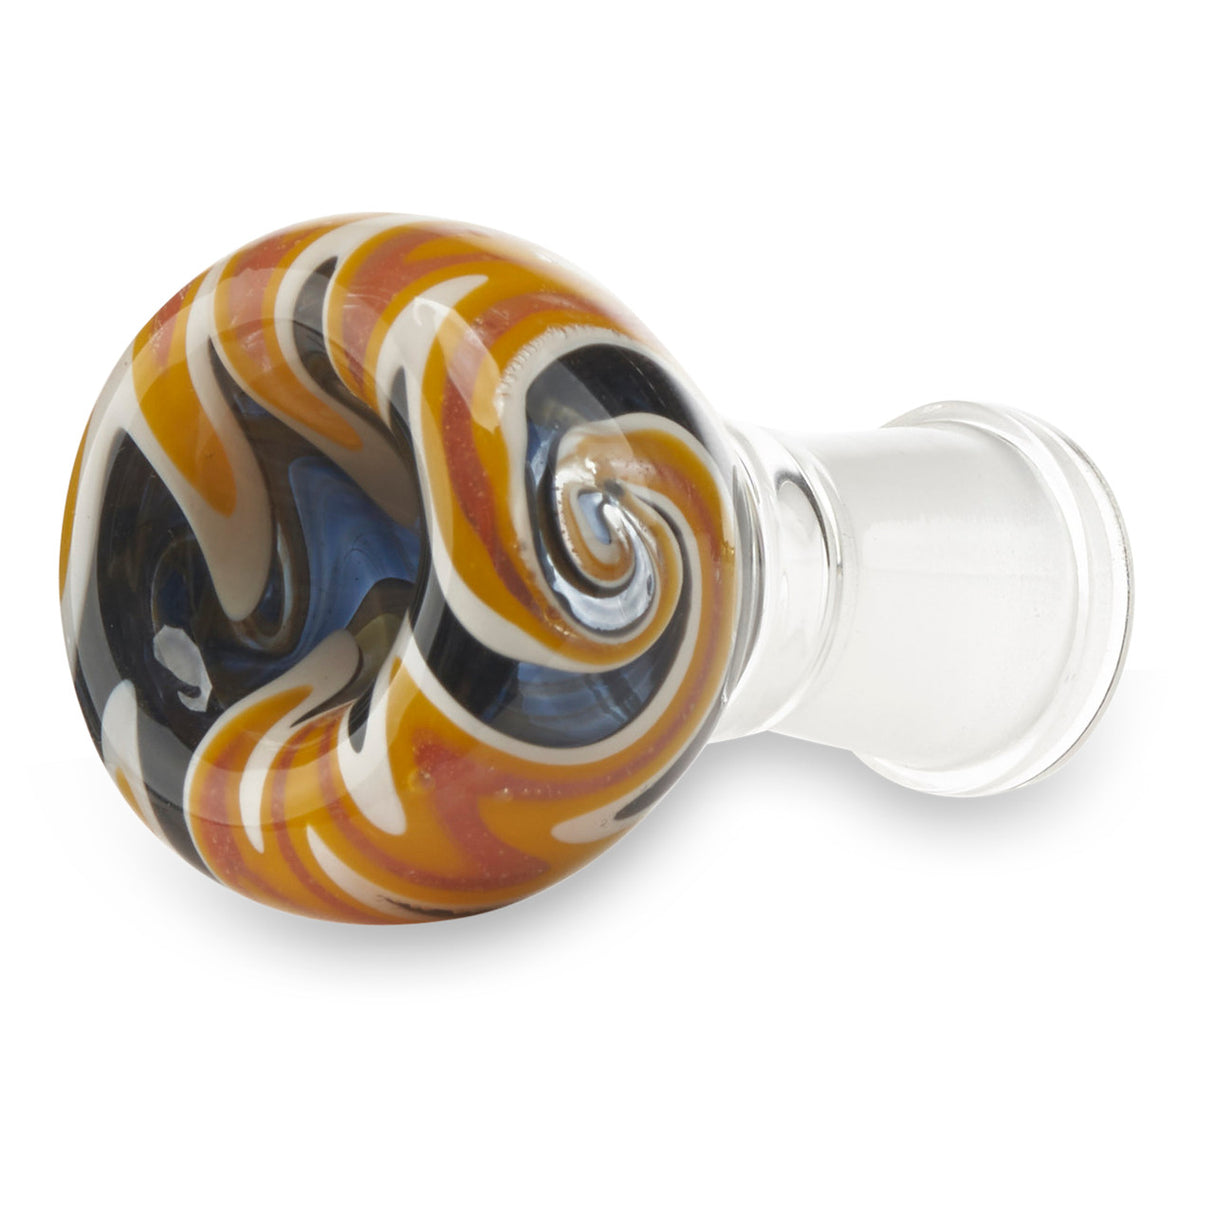 hand blown reverse slides 14mm female joint on sale at the low price of $14.99